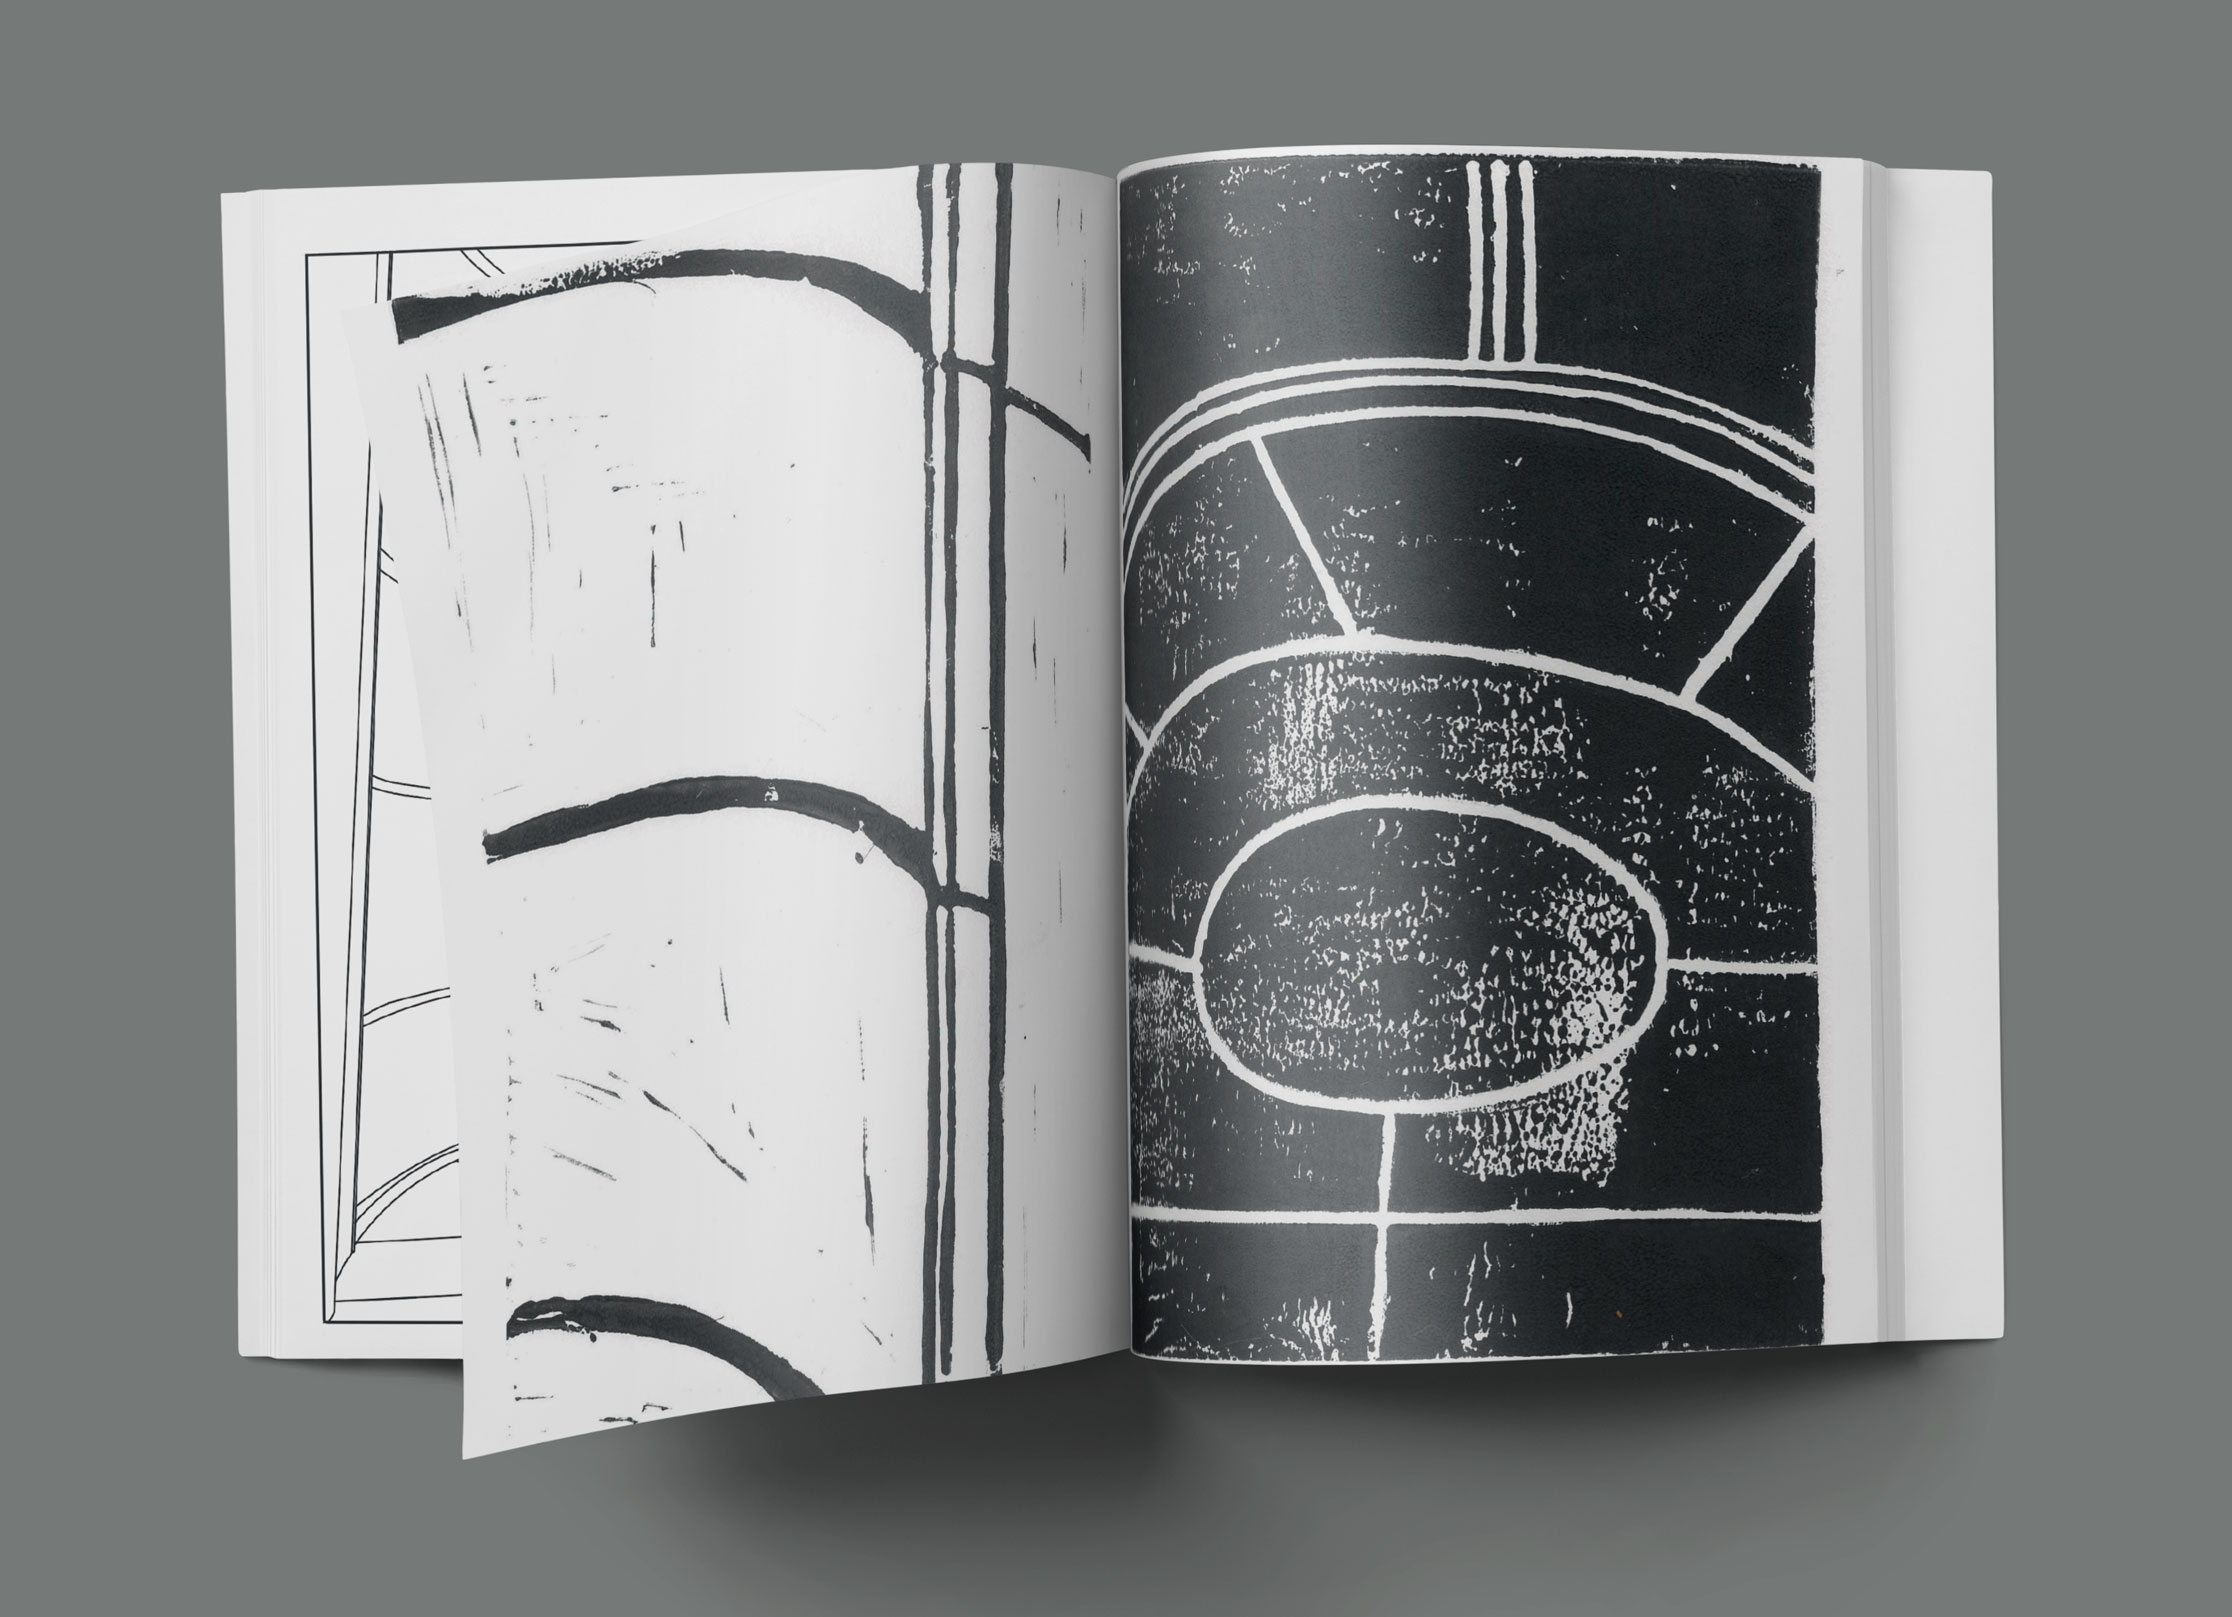 Mock-up of publication, showing spread artwork, architectural line drawing